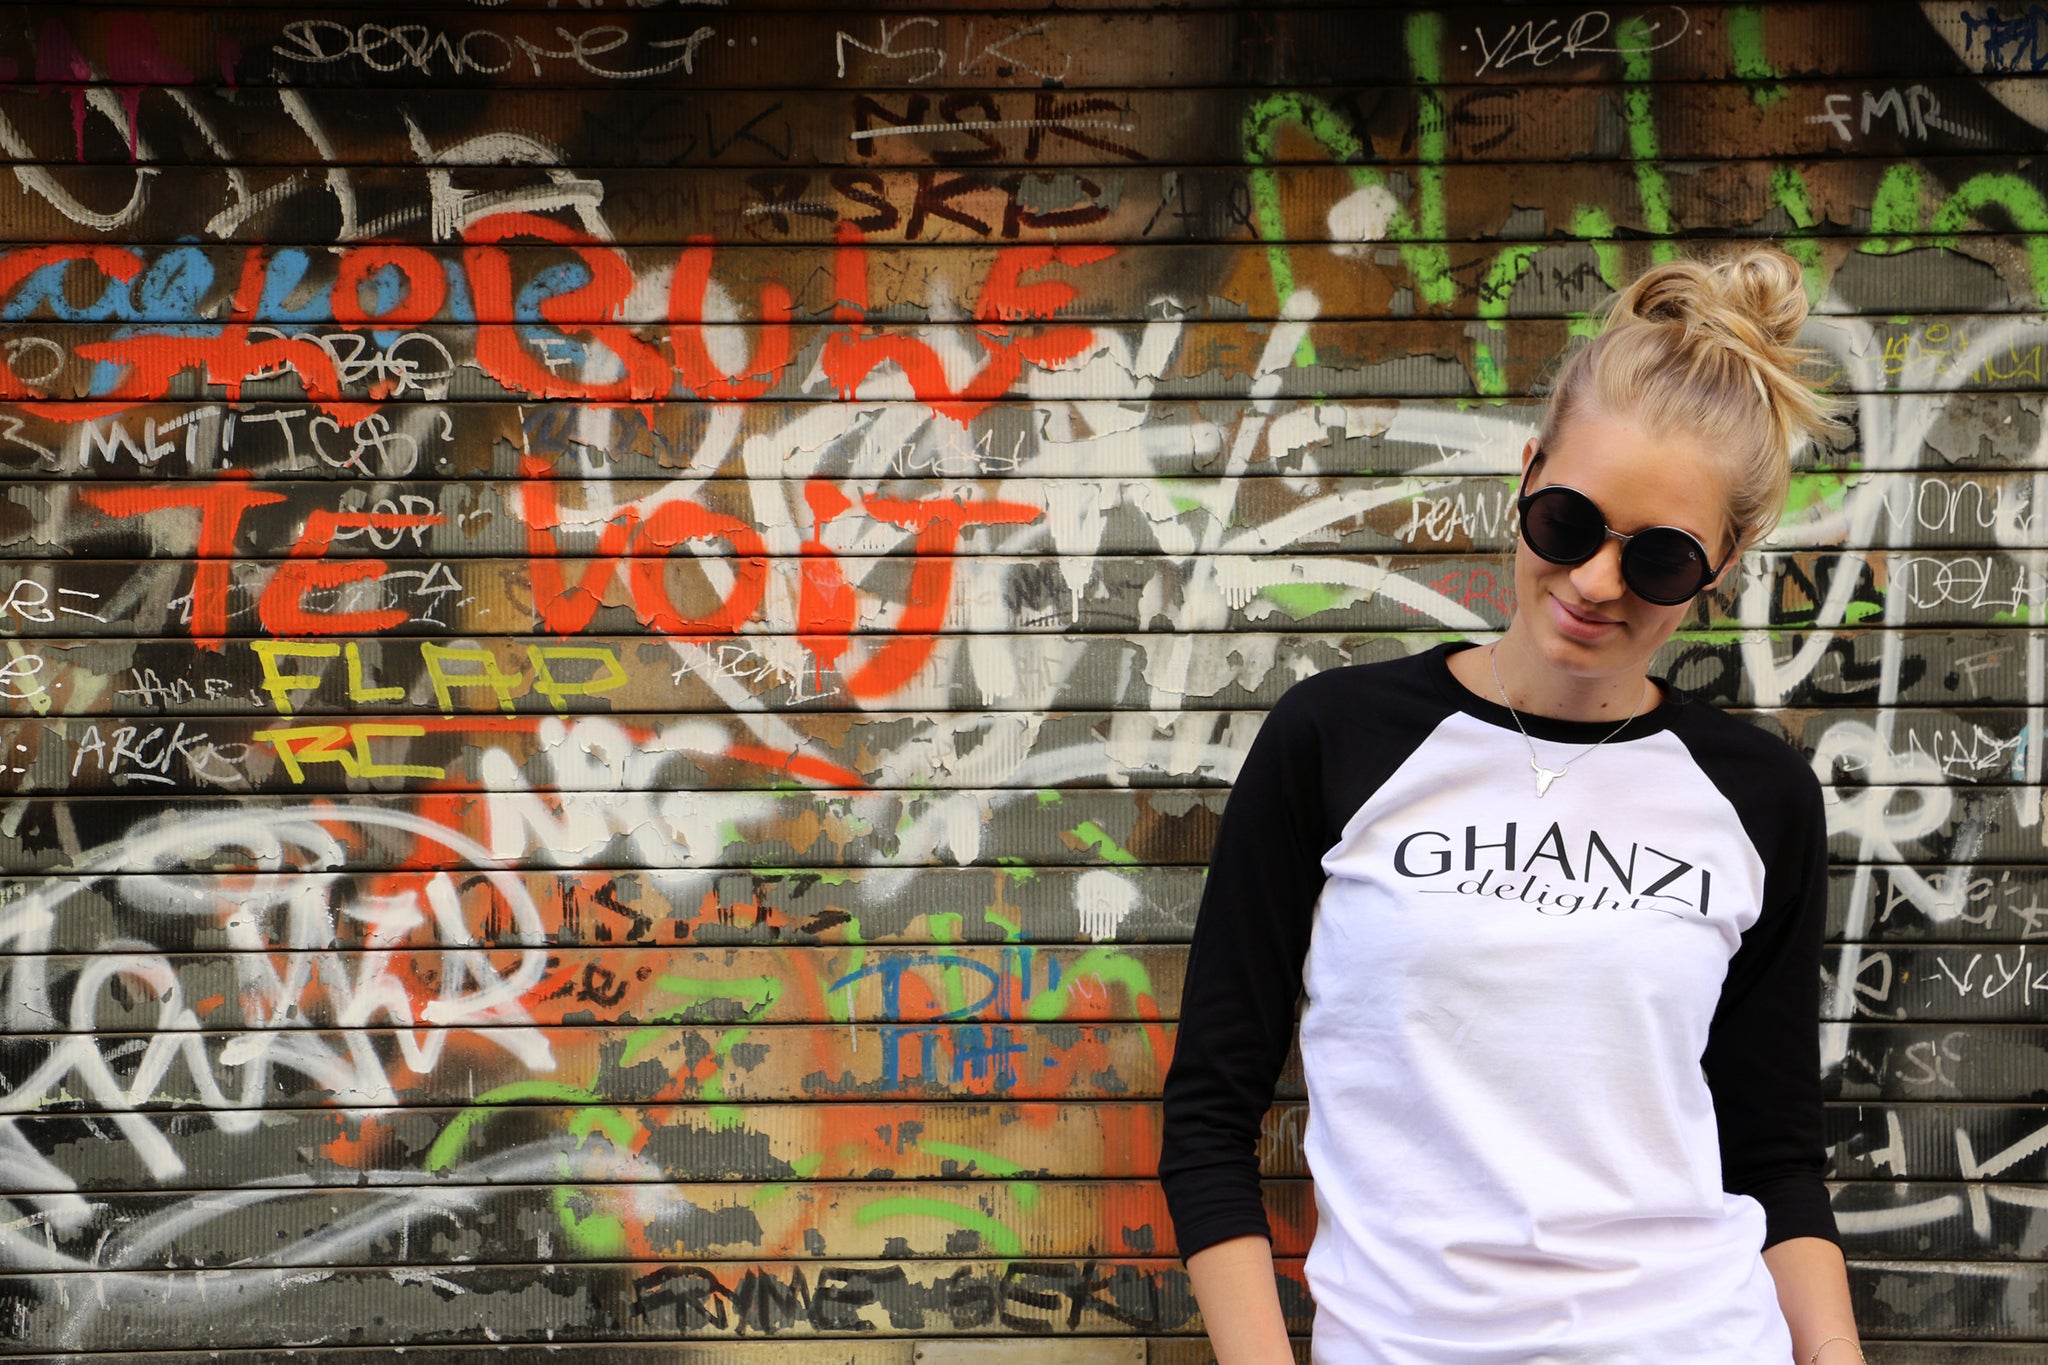 GHANZI Brand Team french model Blandine Reynaud, Delight collection, Aix en Provence 